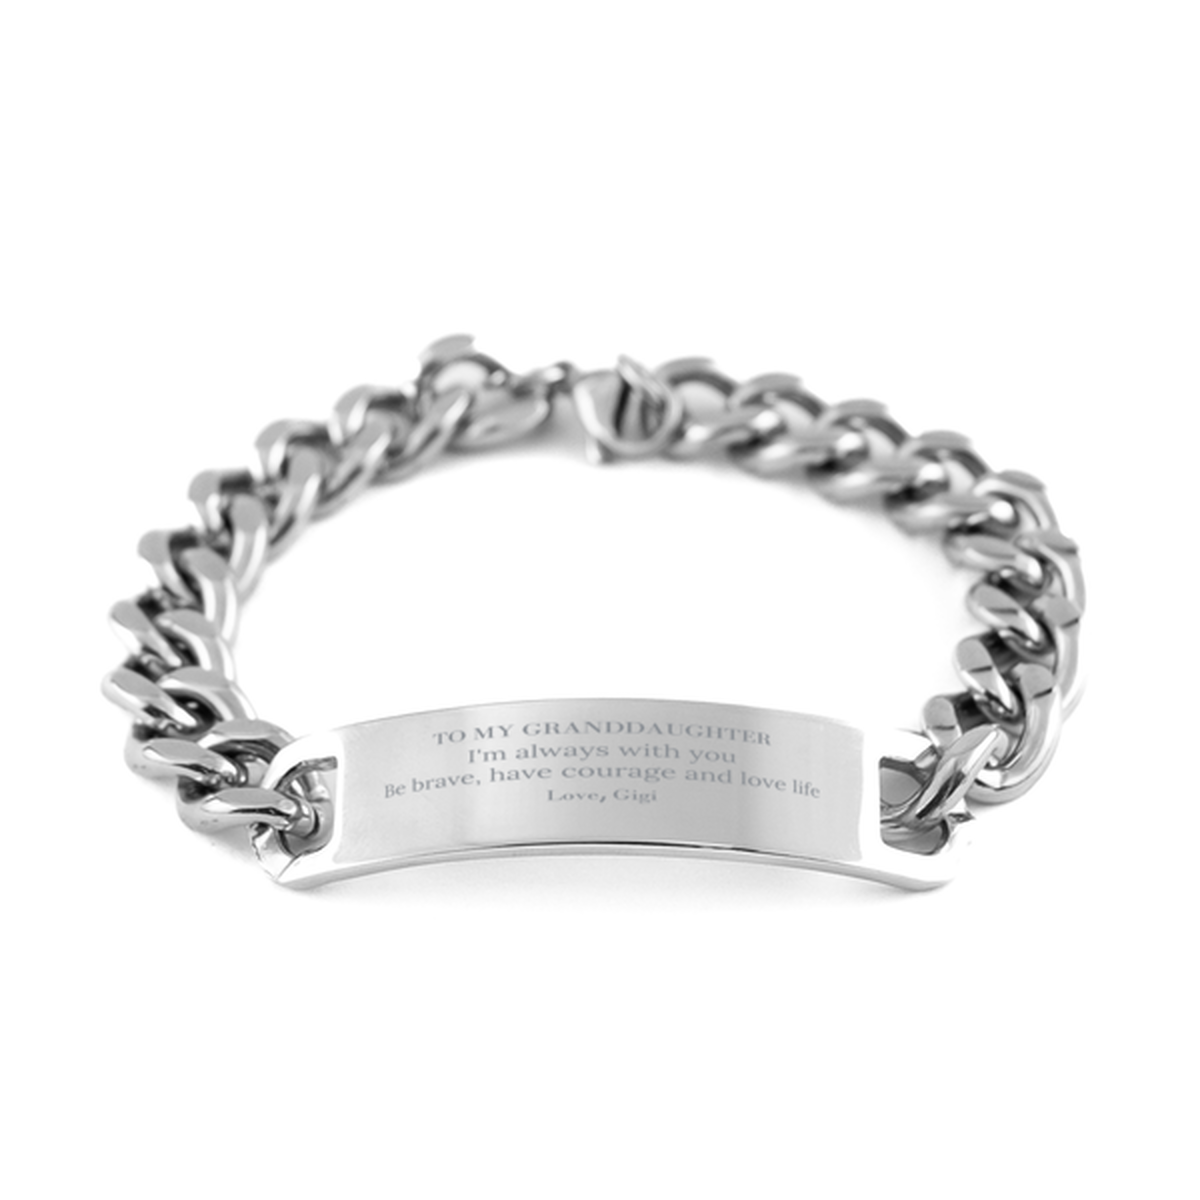 To My Granddaughter Gifts from Gigi, Unique Cuban Chain Stainless Steel Bracelet Inspirational Christmas Birthday Graduation Gifts for Granddaughter I'm always with you. Be brave, have courage and love life. Love, Gigi